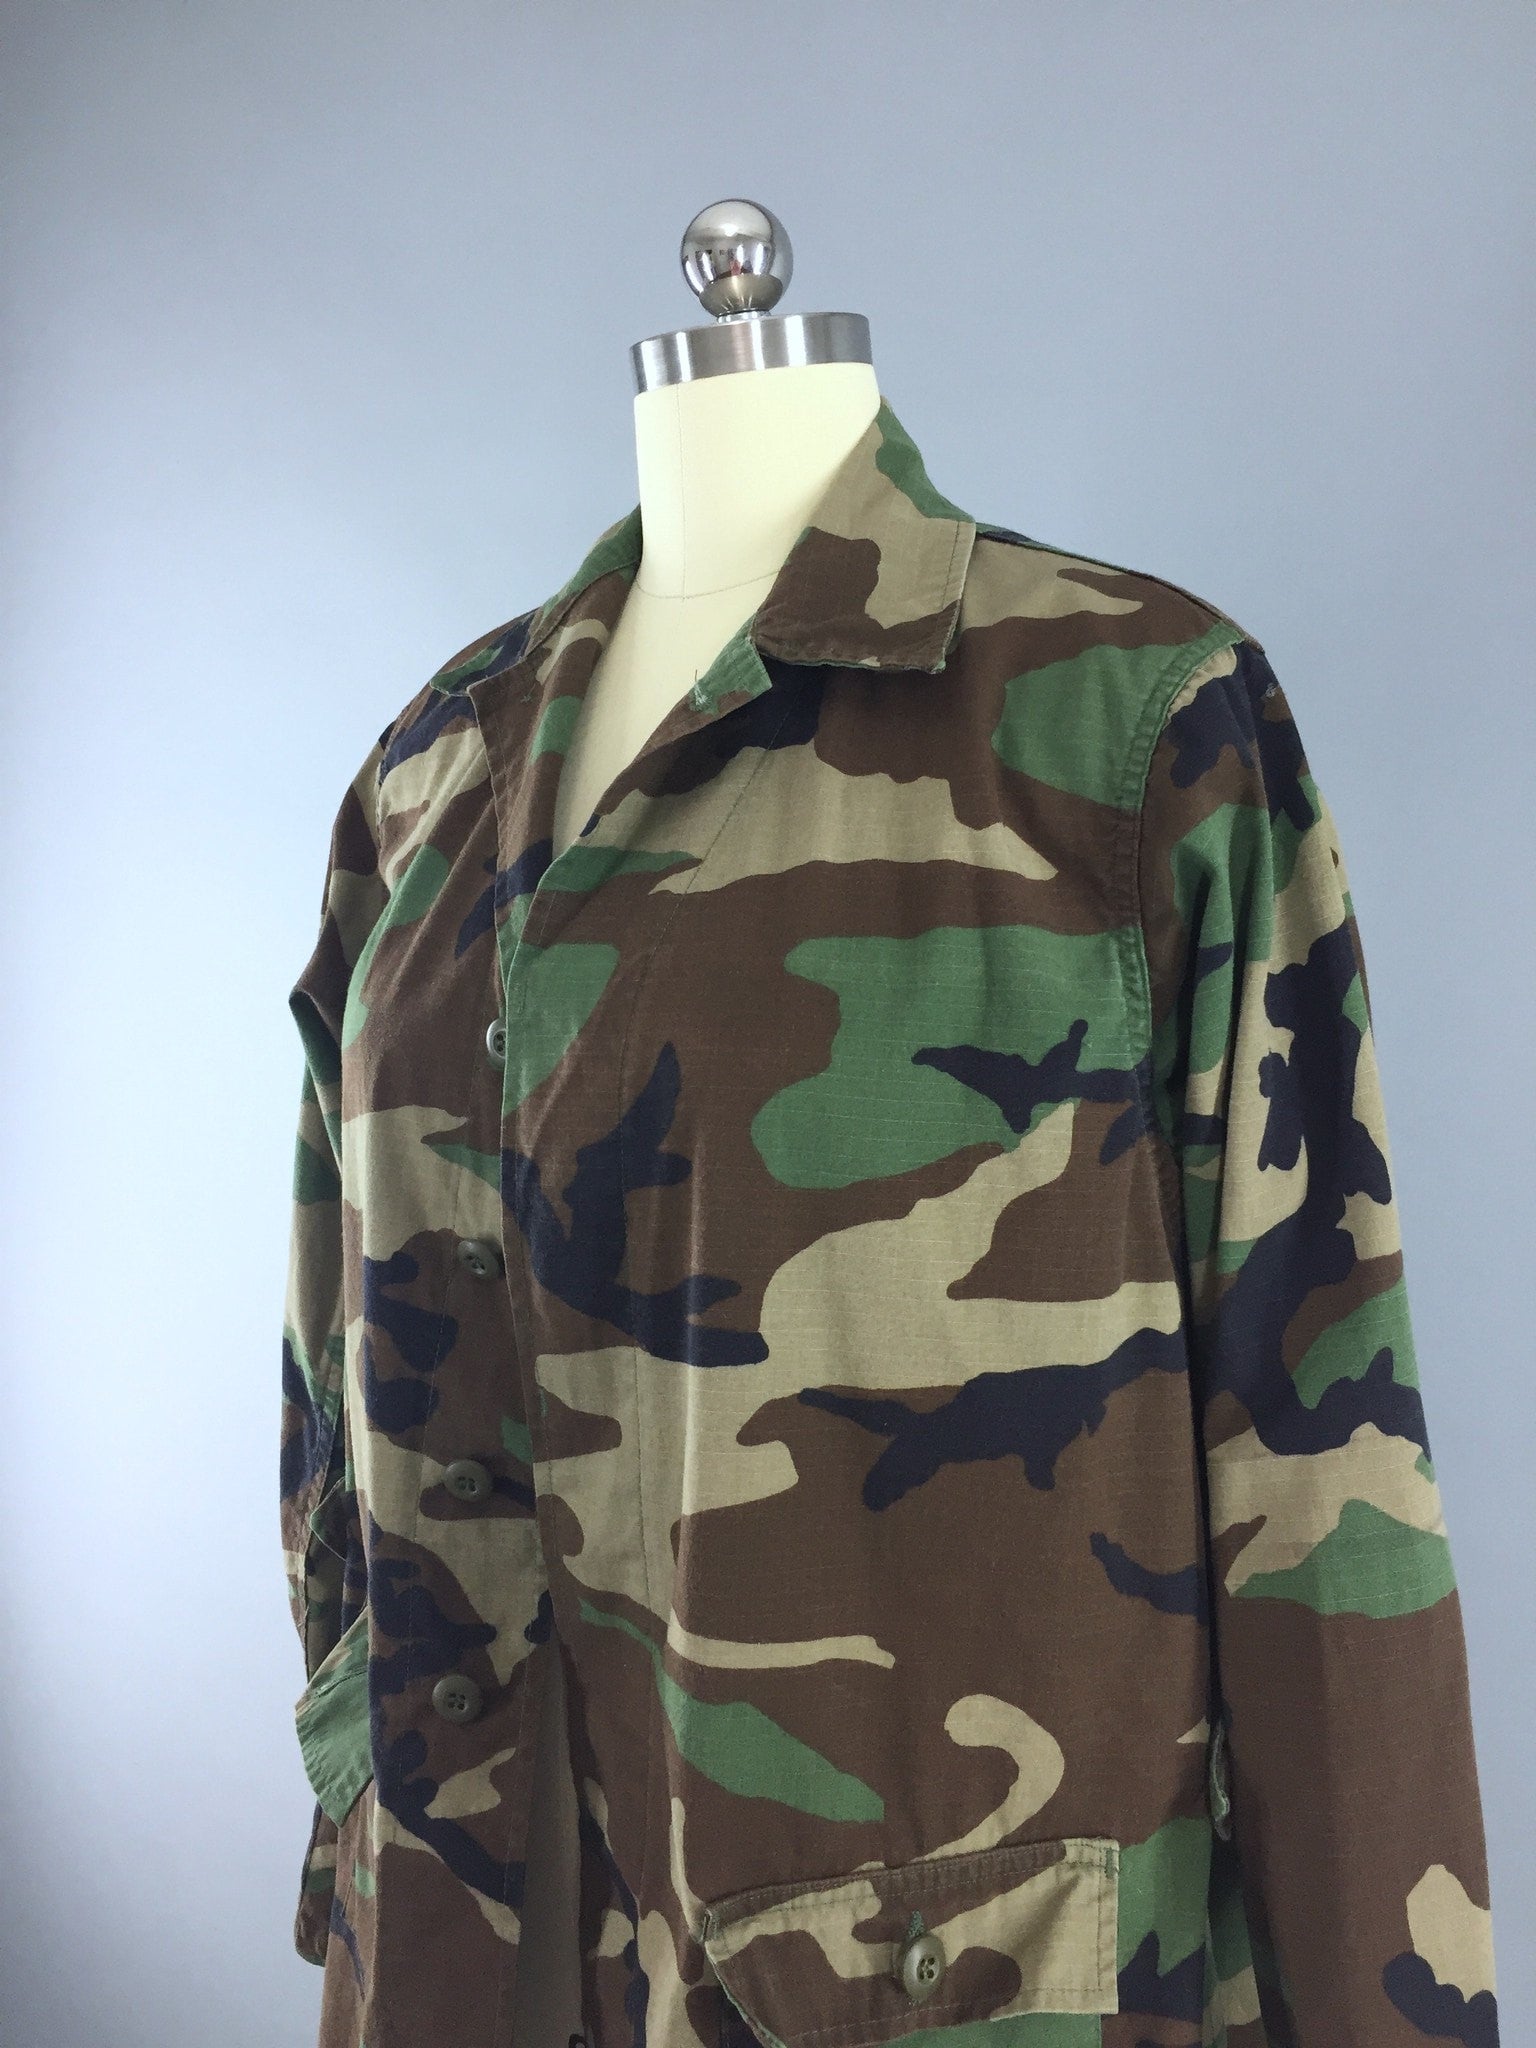 Embroidered US Army Camouflage Jacket Women's Military Coat